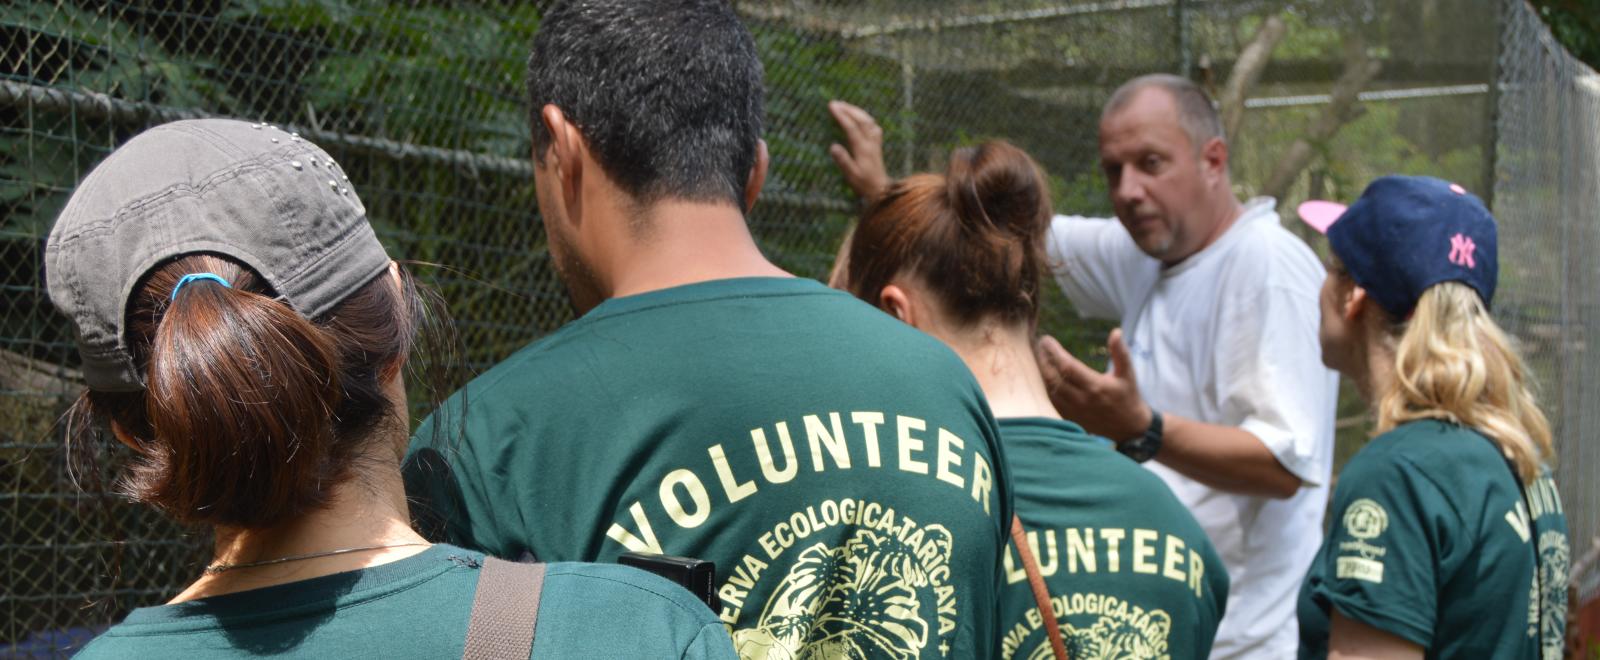 Stuart Timson take the Conservation volunteers on a tour of the animal rescue centre in Peru